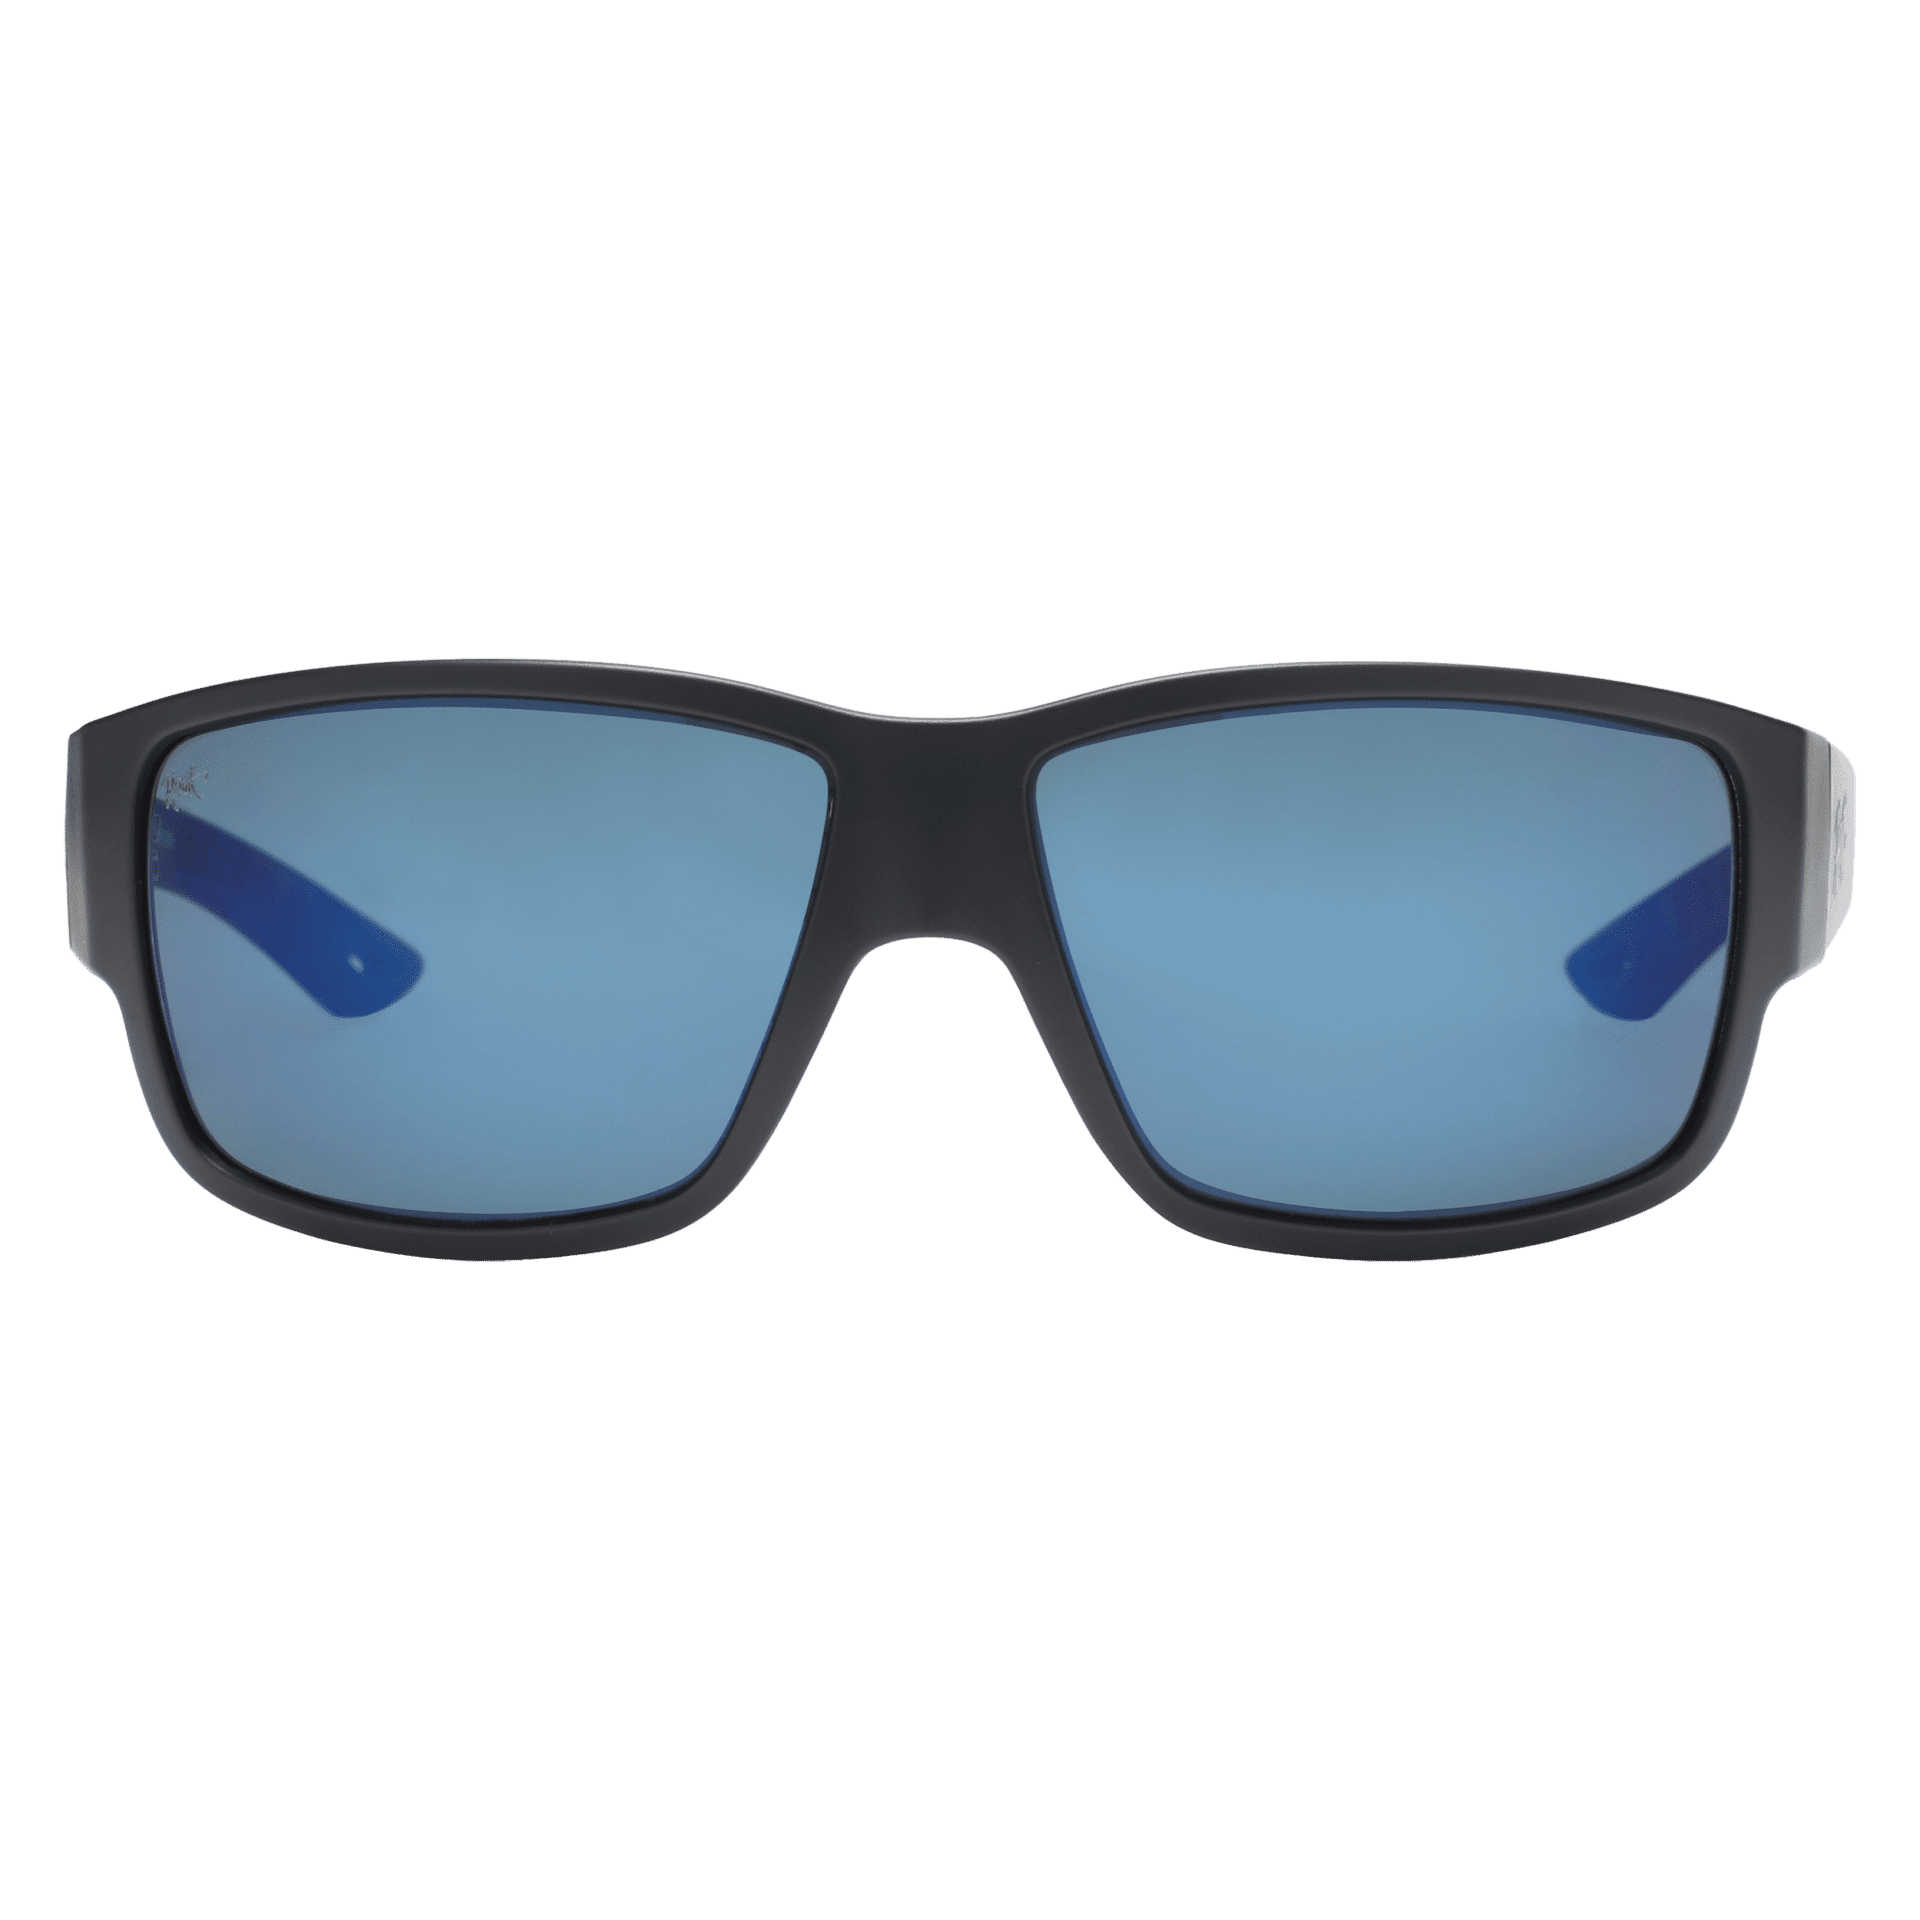 Polarized Sunglasses Great fit for Extra Large Faces Black Frame